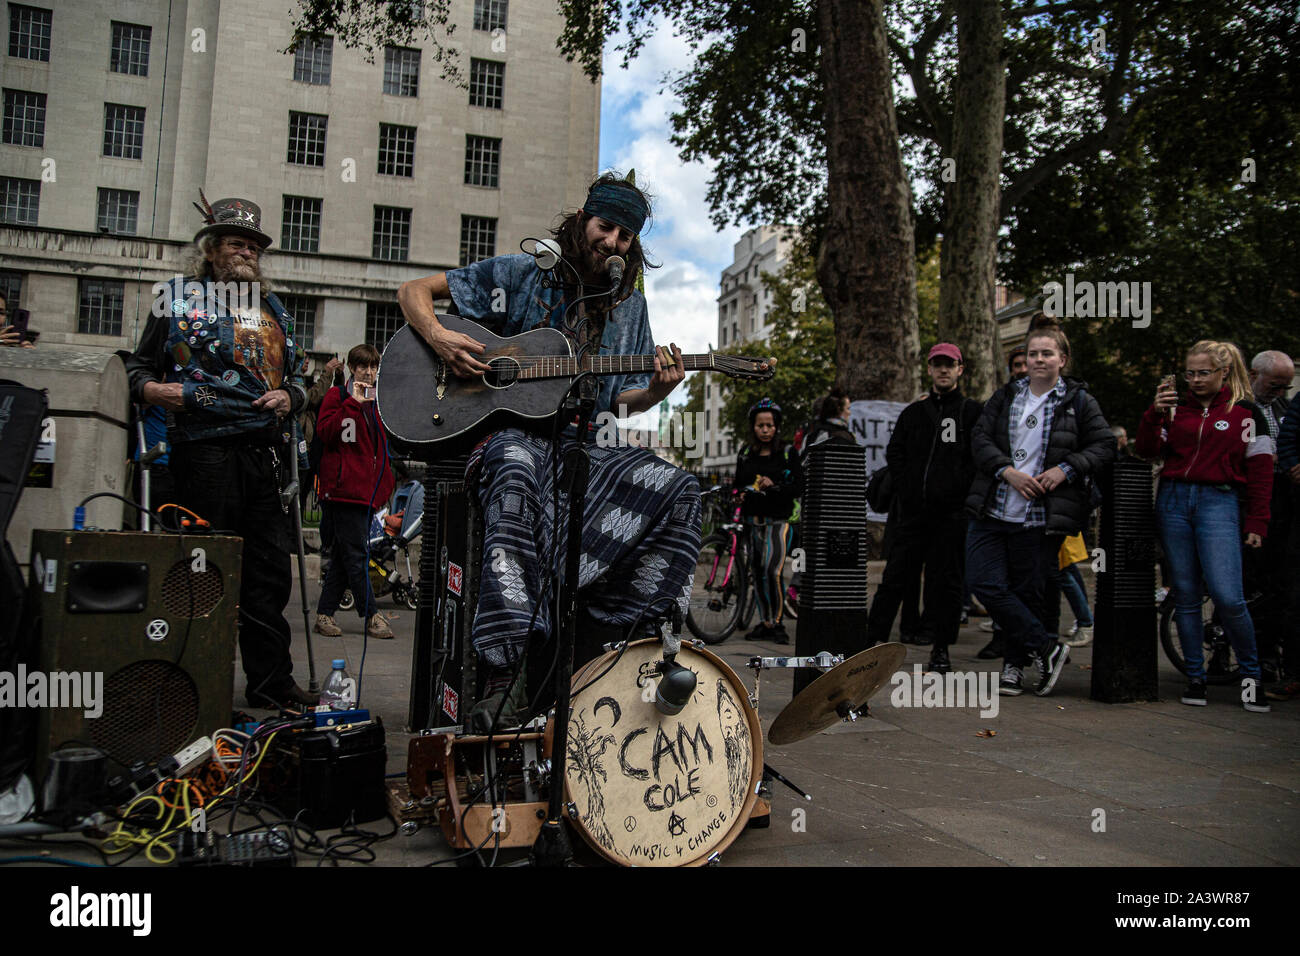 A man performs during the protest.Protesters took to the street in central London across this week and next week to highlight the 'climate emergency' facing the planet. Stock Photo